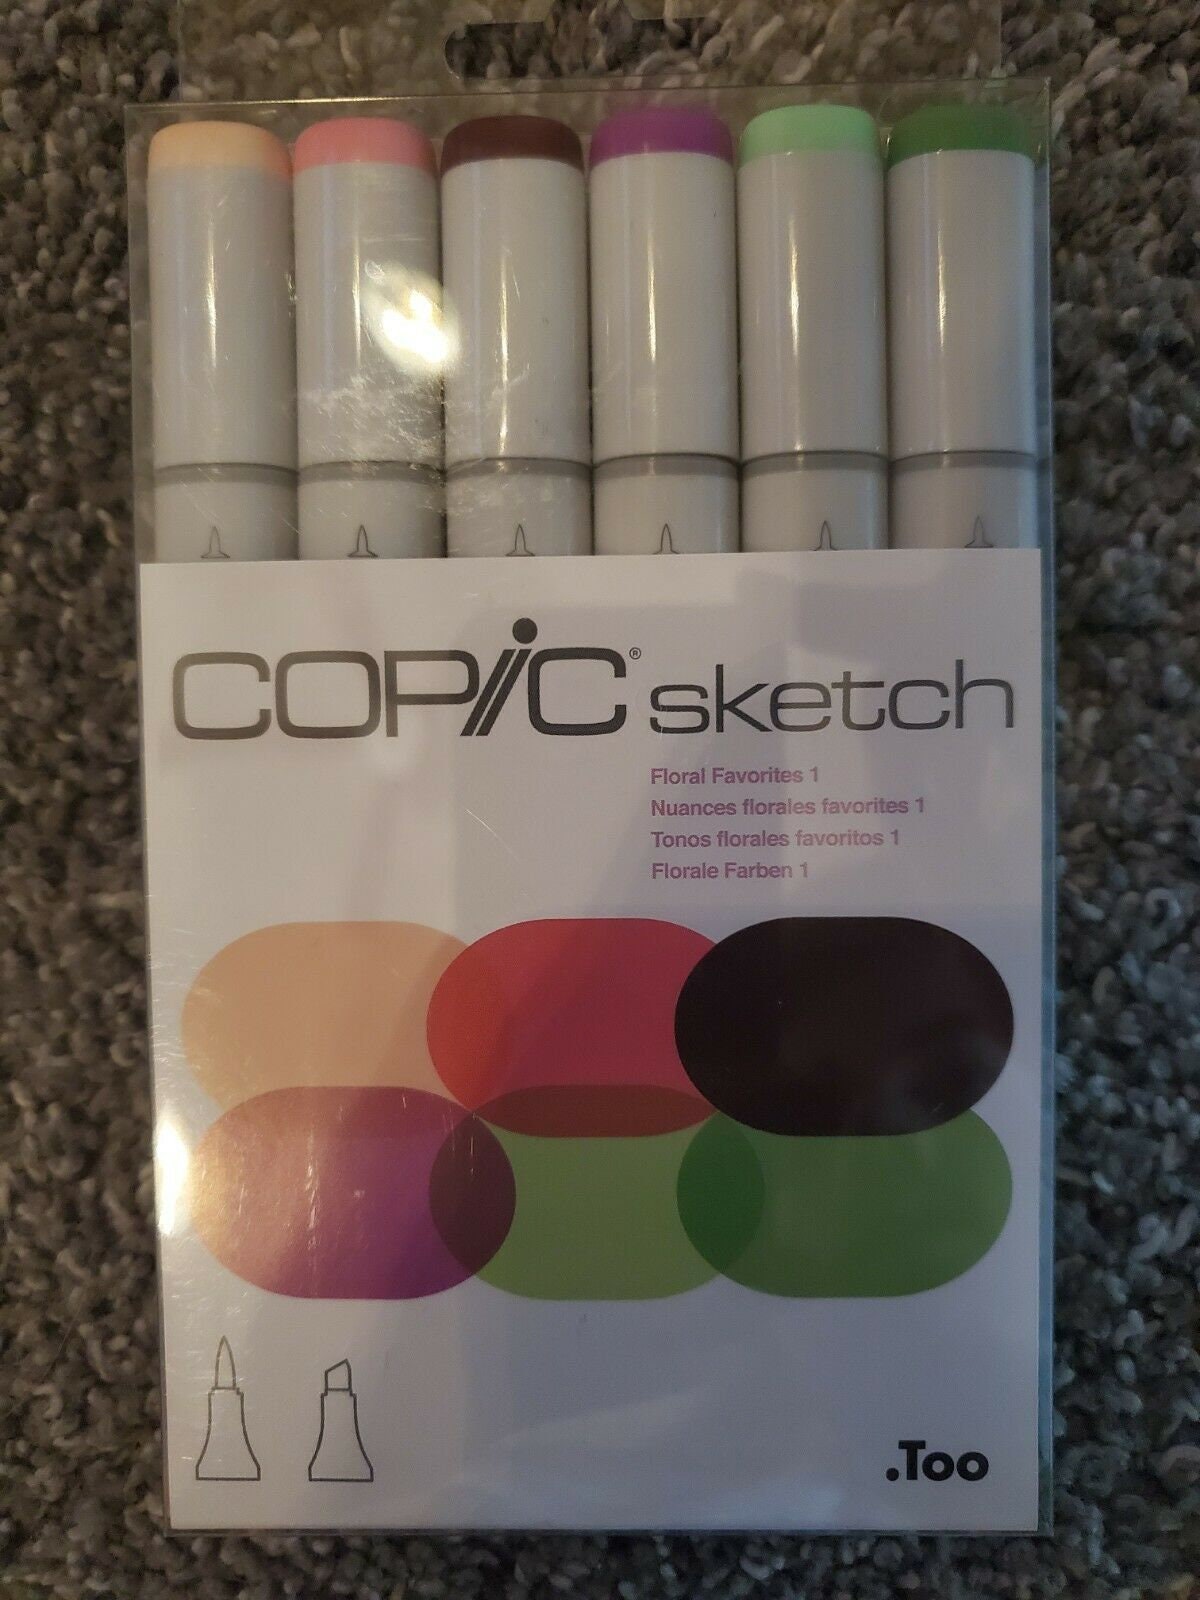 36 Copic Markers Sketch Basic Artist Set Copic Sketch Drawing Set of 36 Pens  Copic Manga, Anime, Drawing Markers Set 